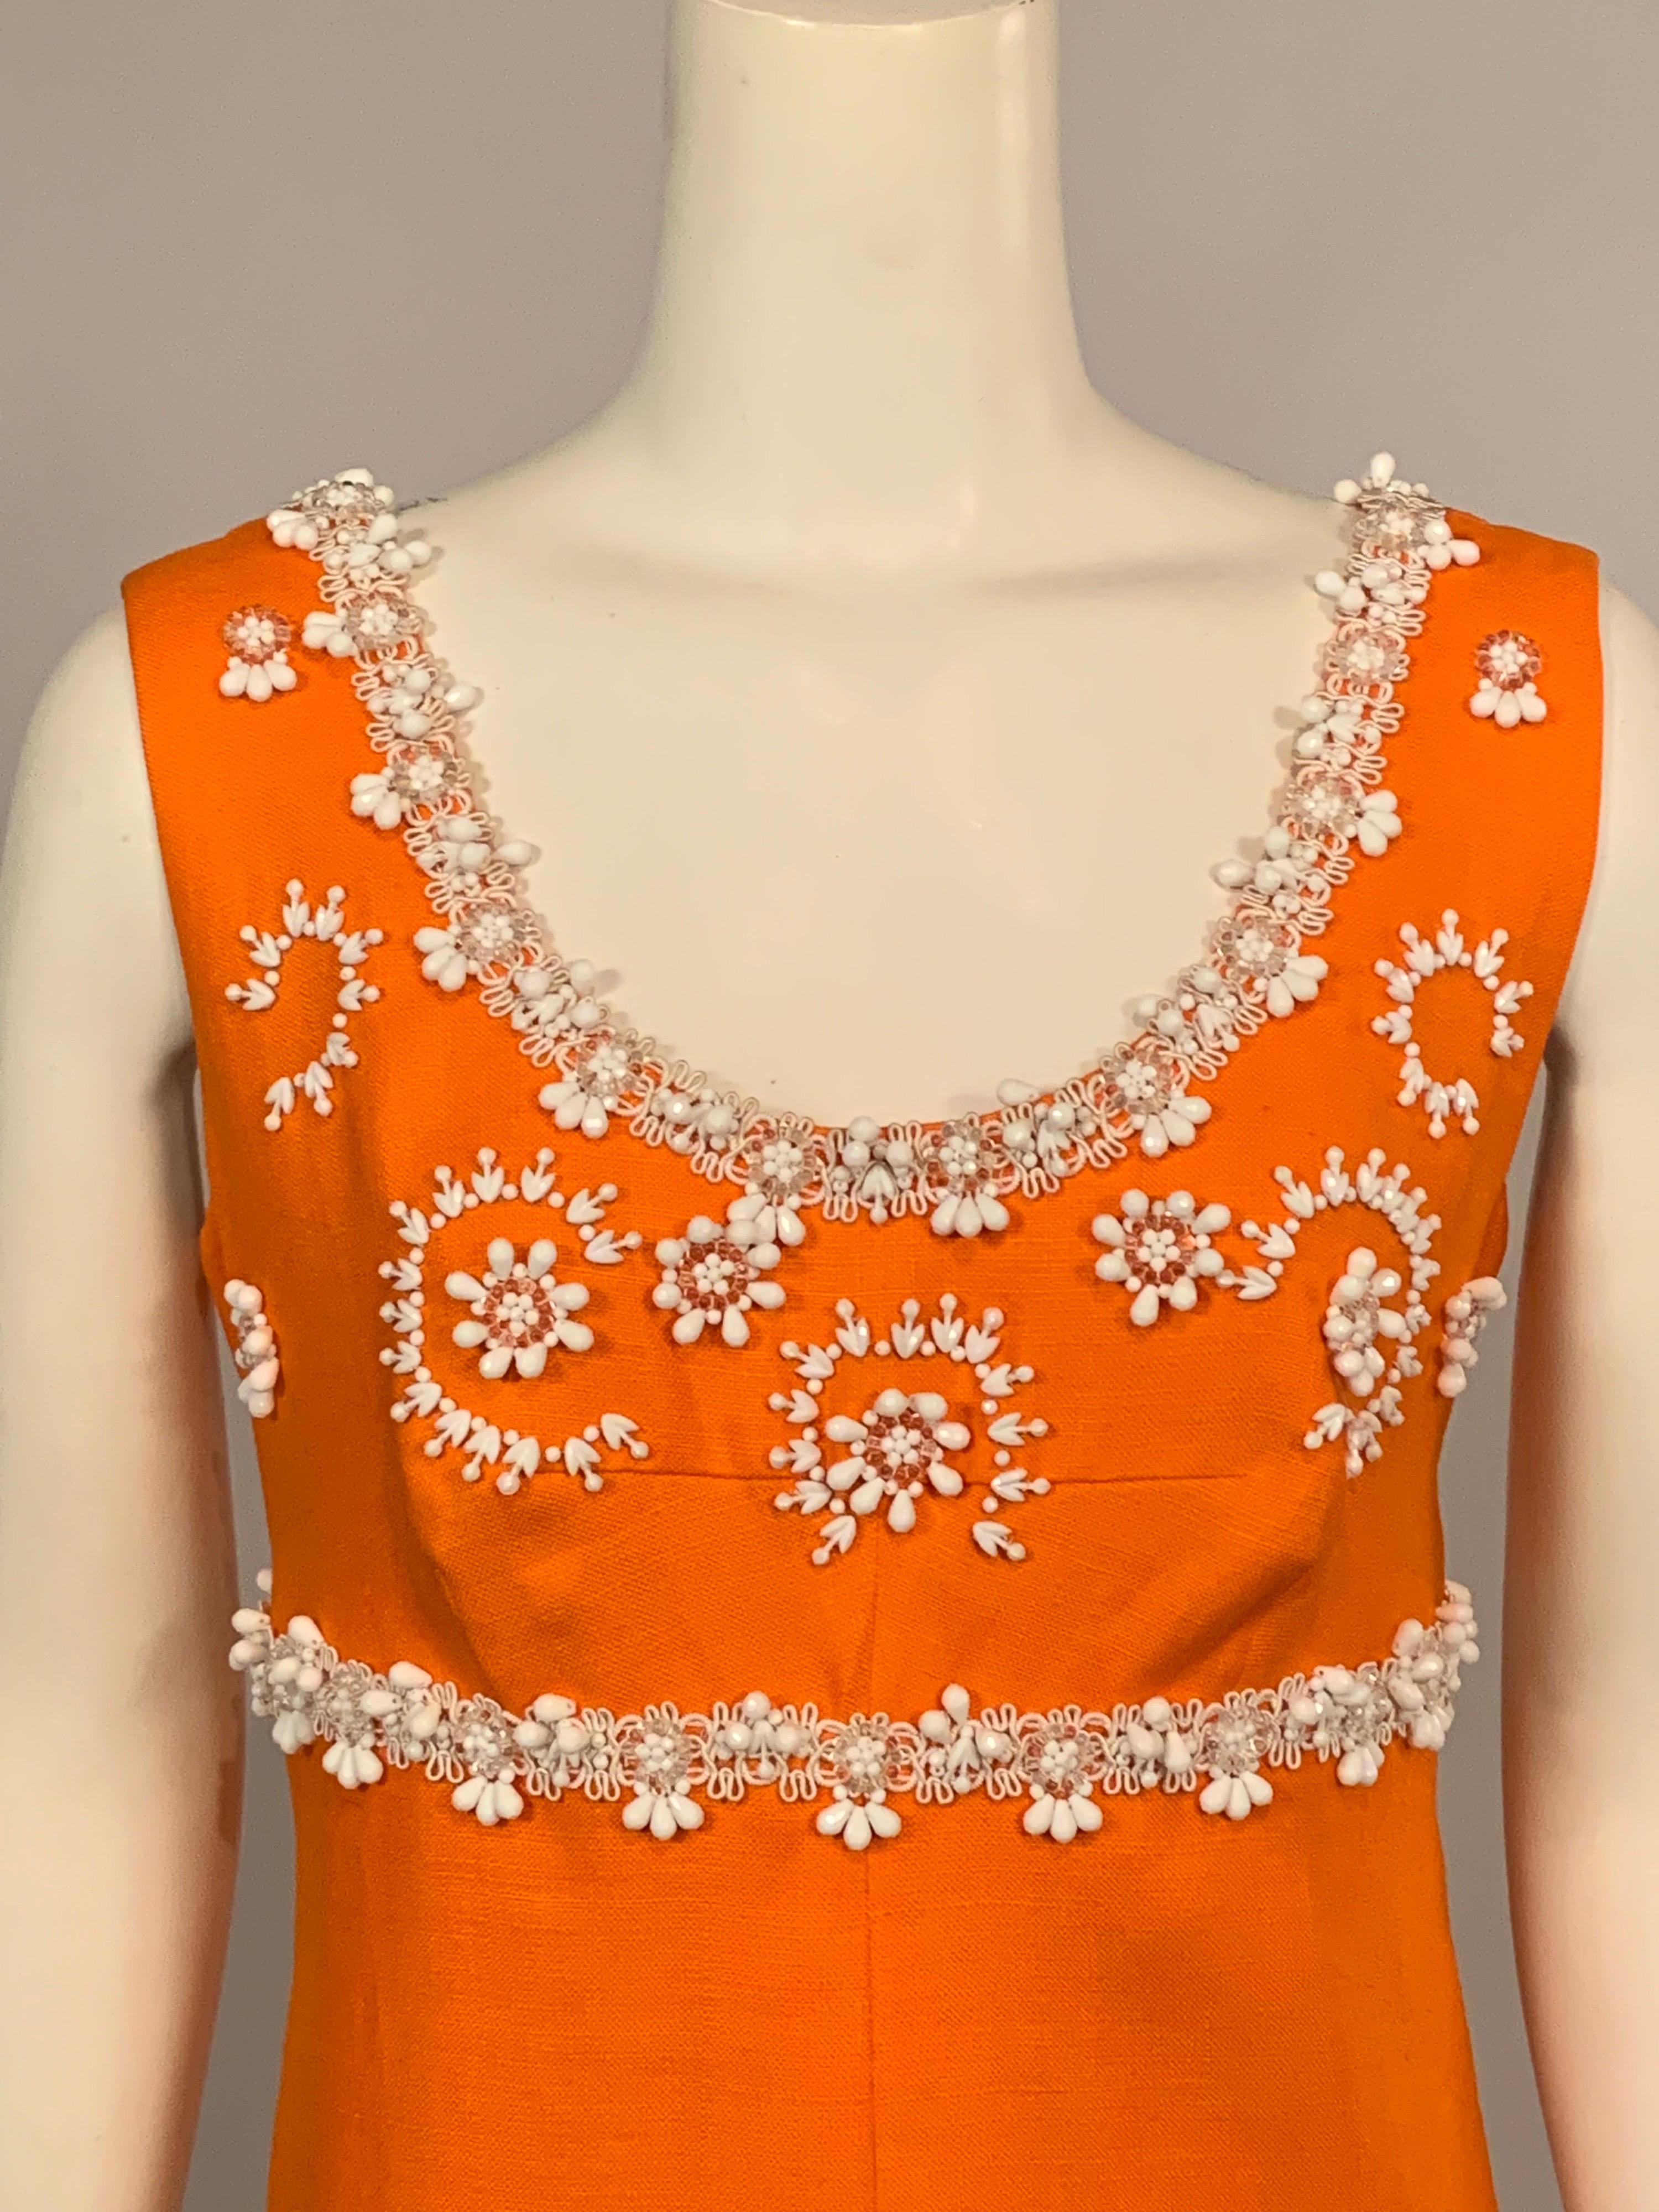 A cheerful bright orange linen dress is embellished with white passementerie and white beadwork on the bodice, empire waistline and the skirt.  It is fully lined and has a center back zipper.
Measurements;   Bust 38